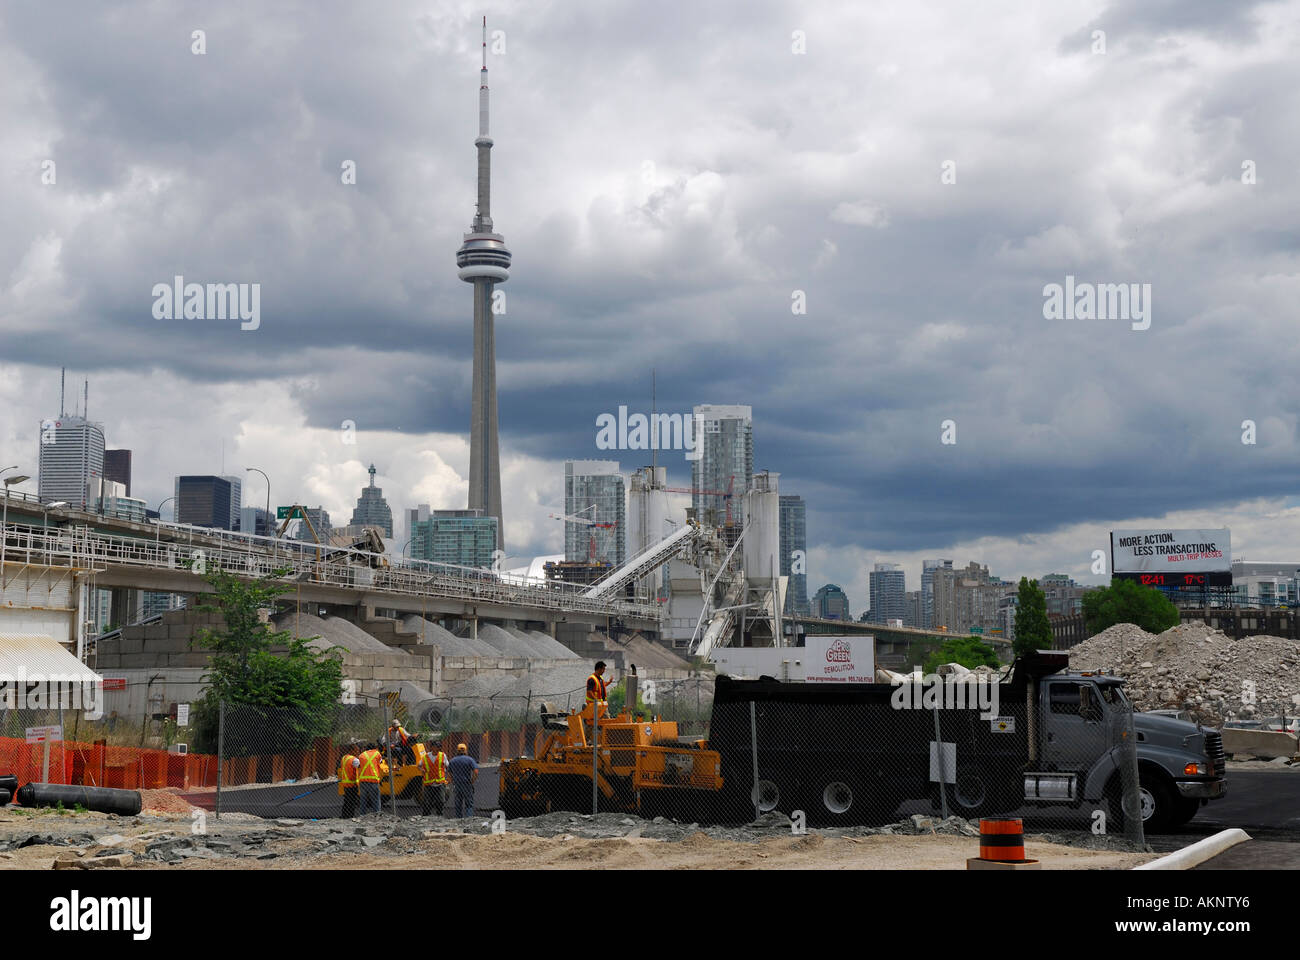 Paving work at Cement Factory with downtown Toronto skyline including CN Tower Stock Photo